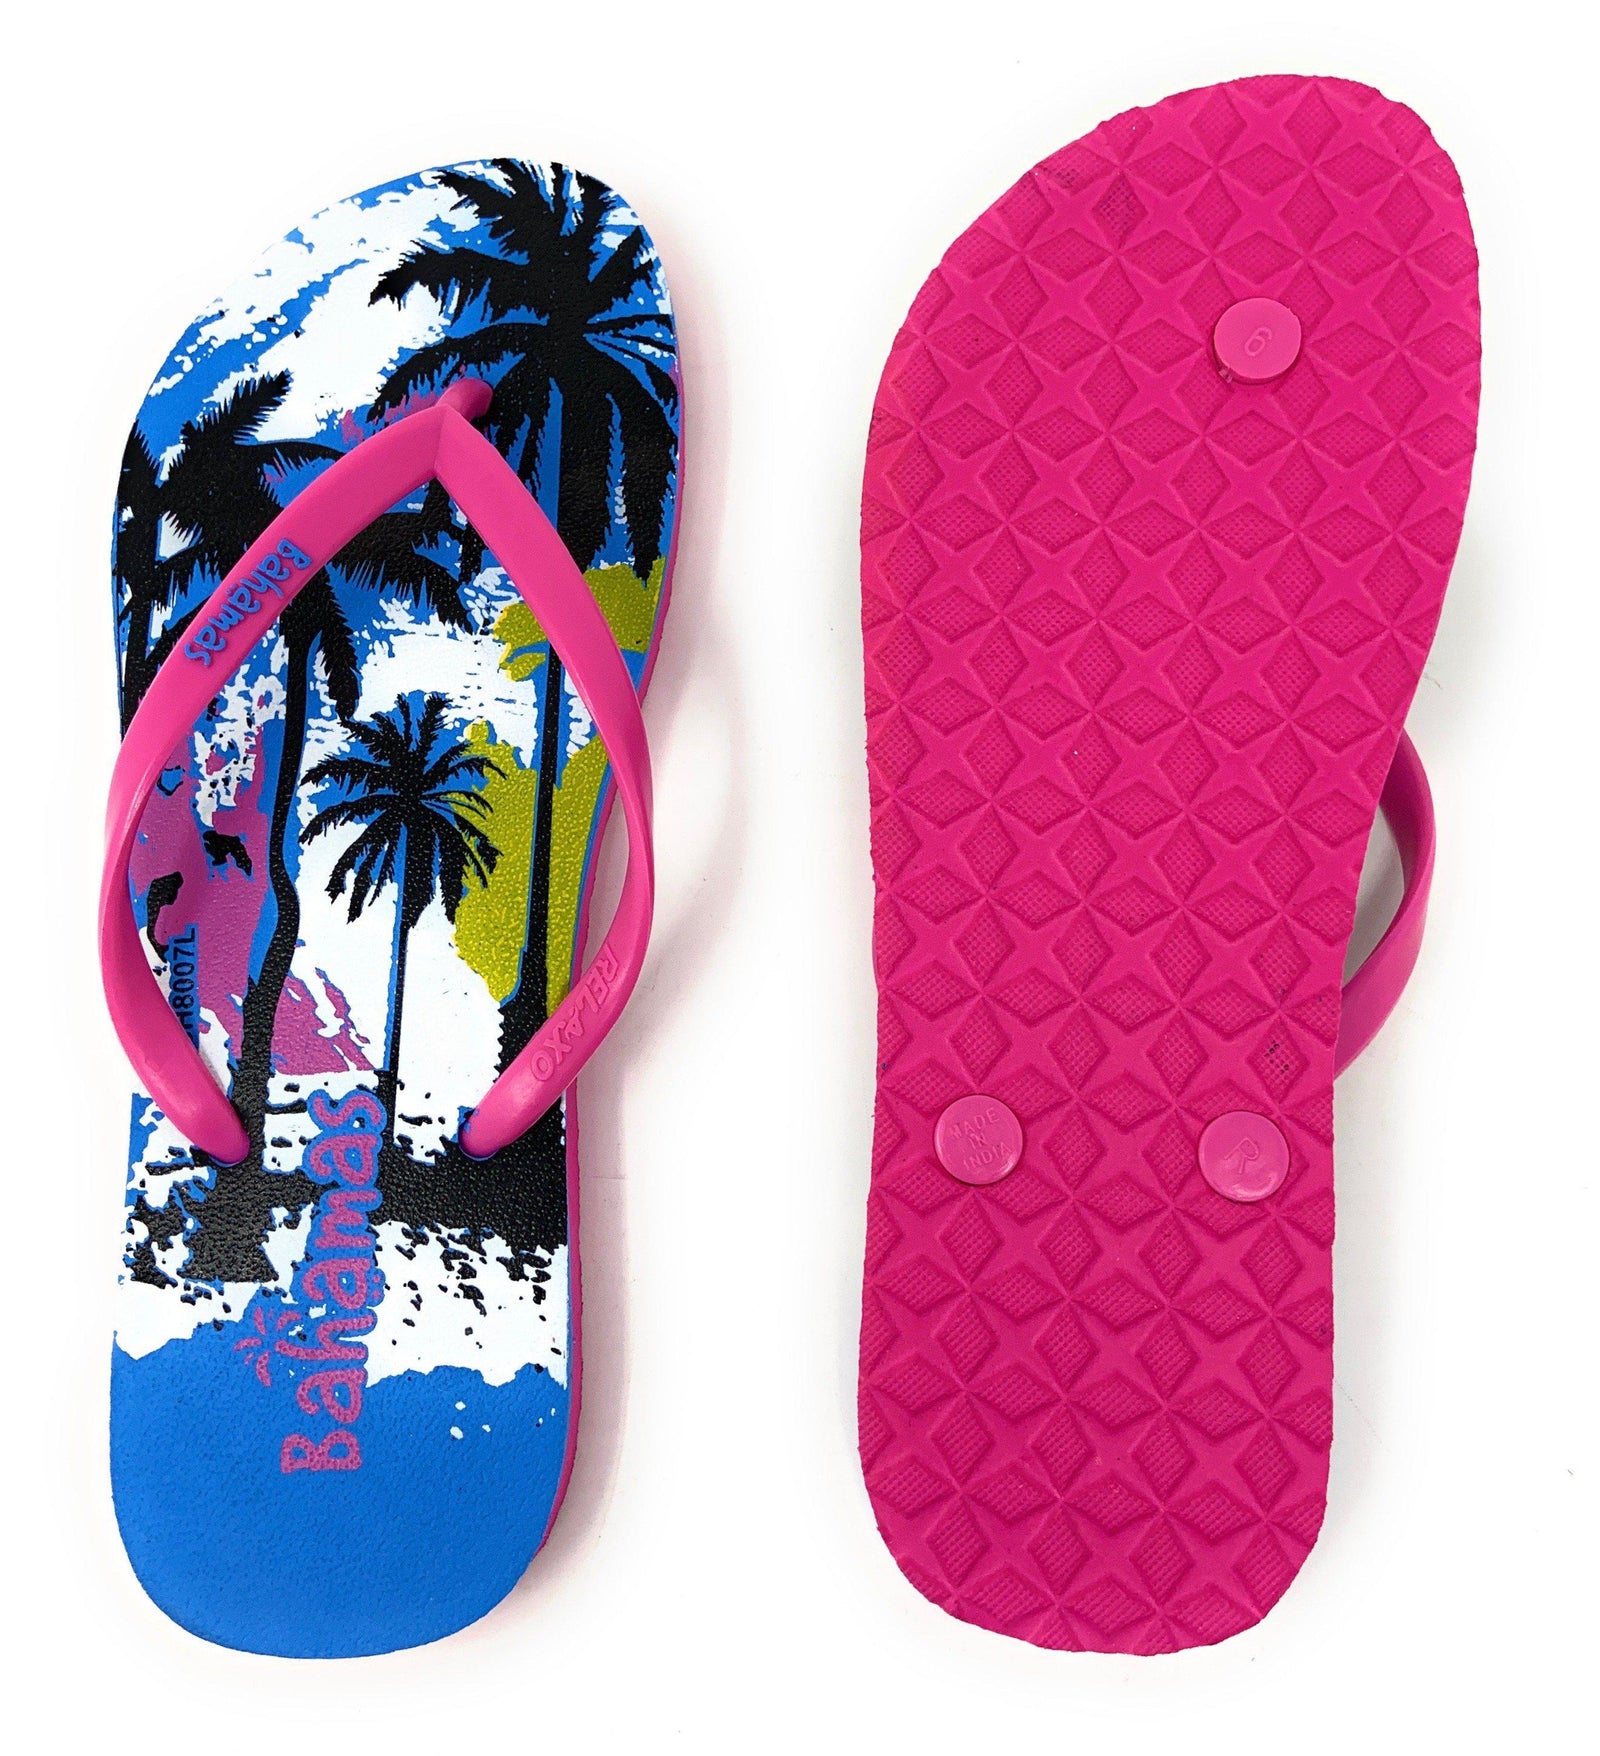 Bahamas Flip Flops Sandals Slippers for Women with Summer Fun Prints